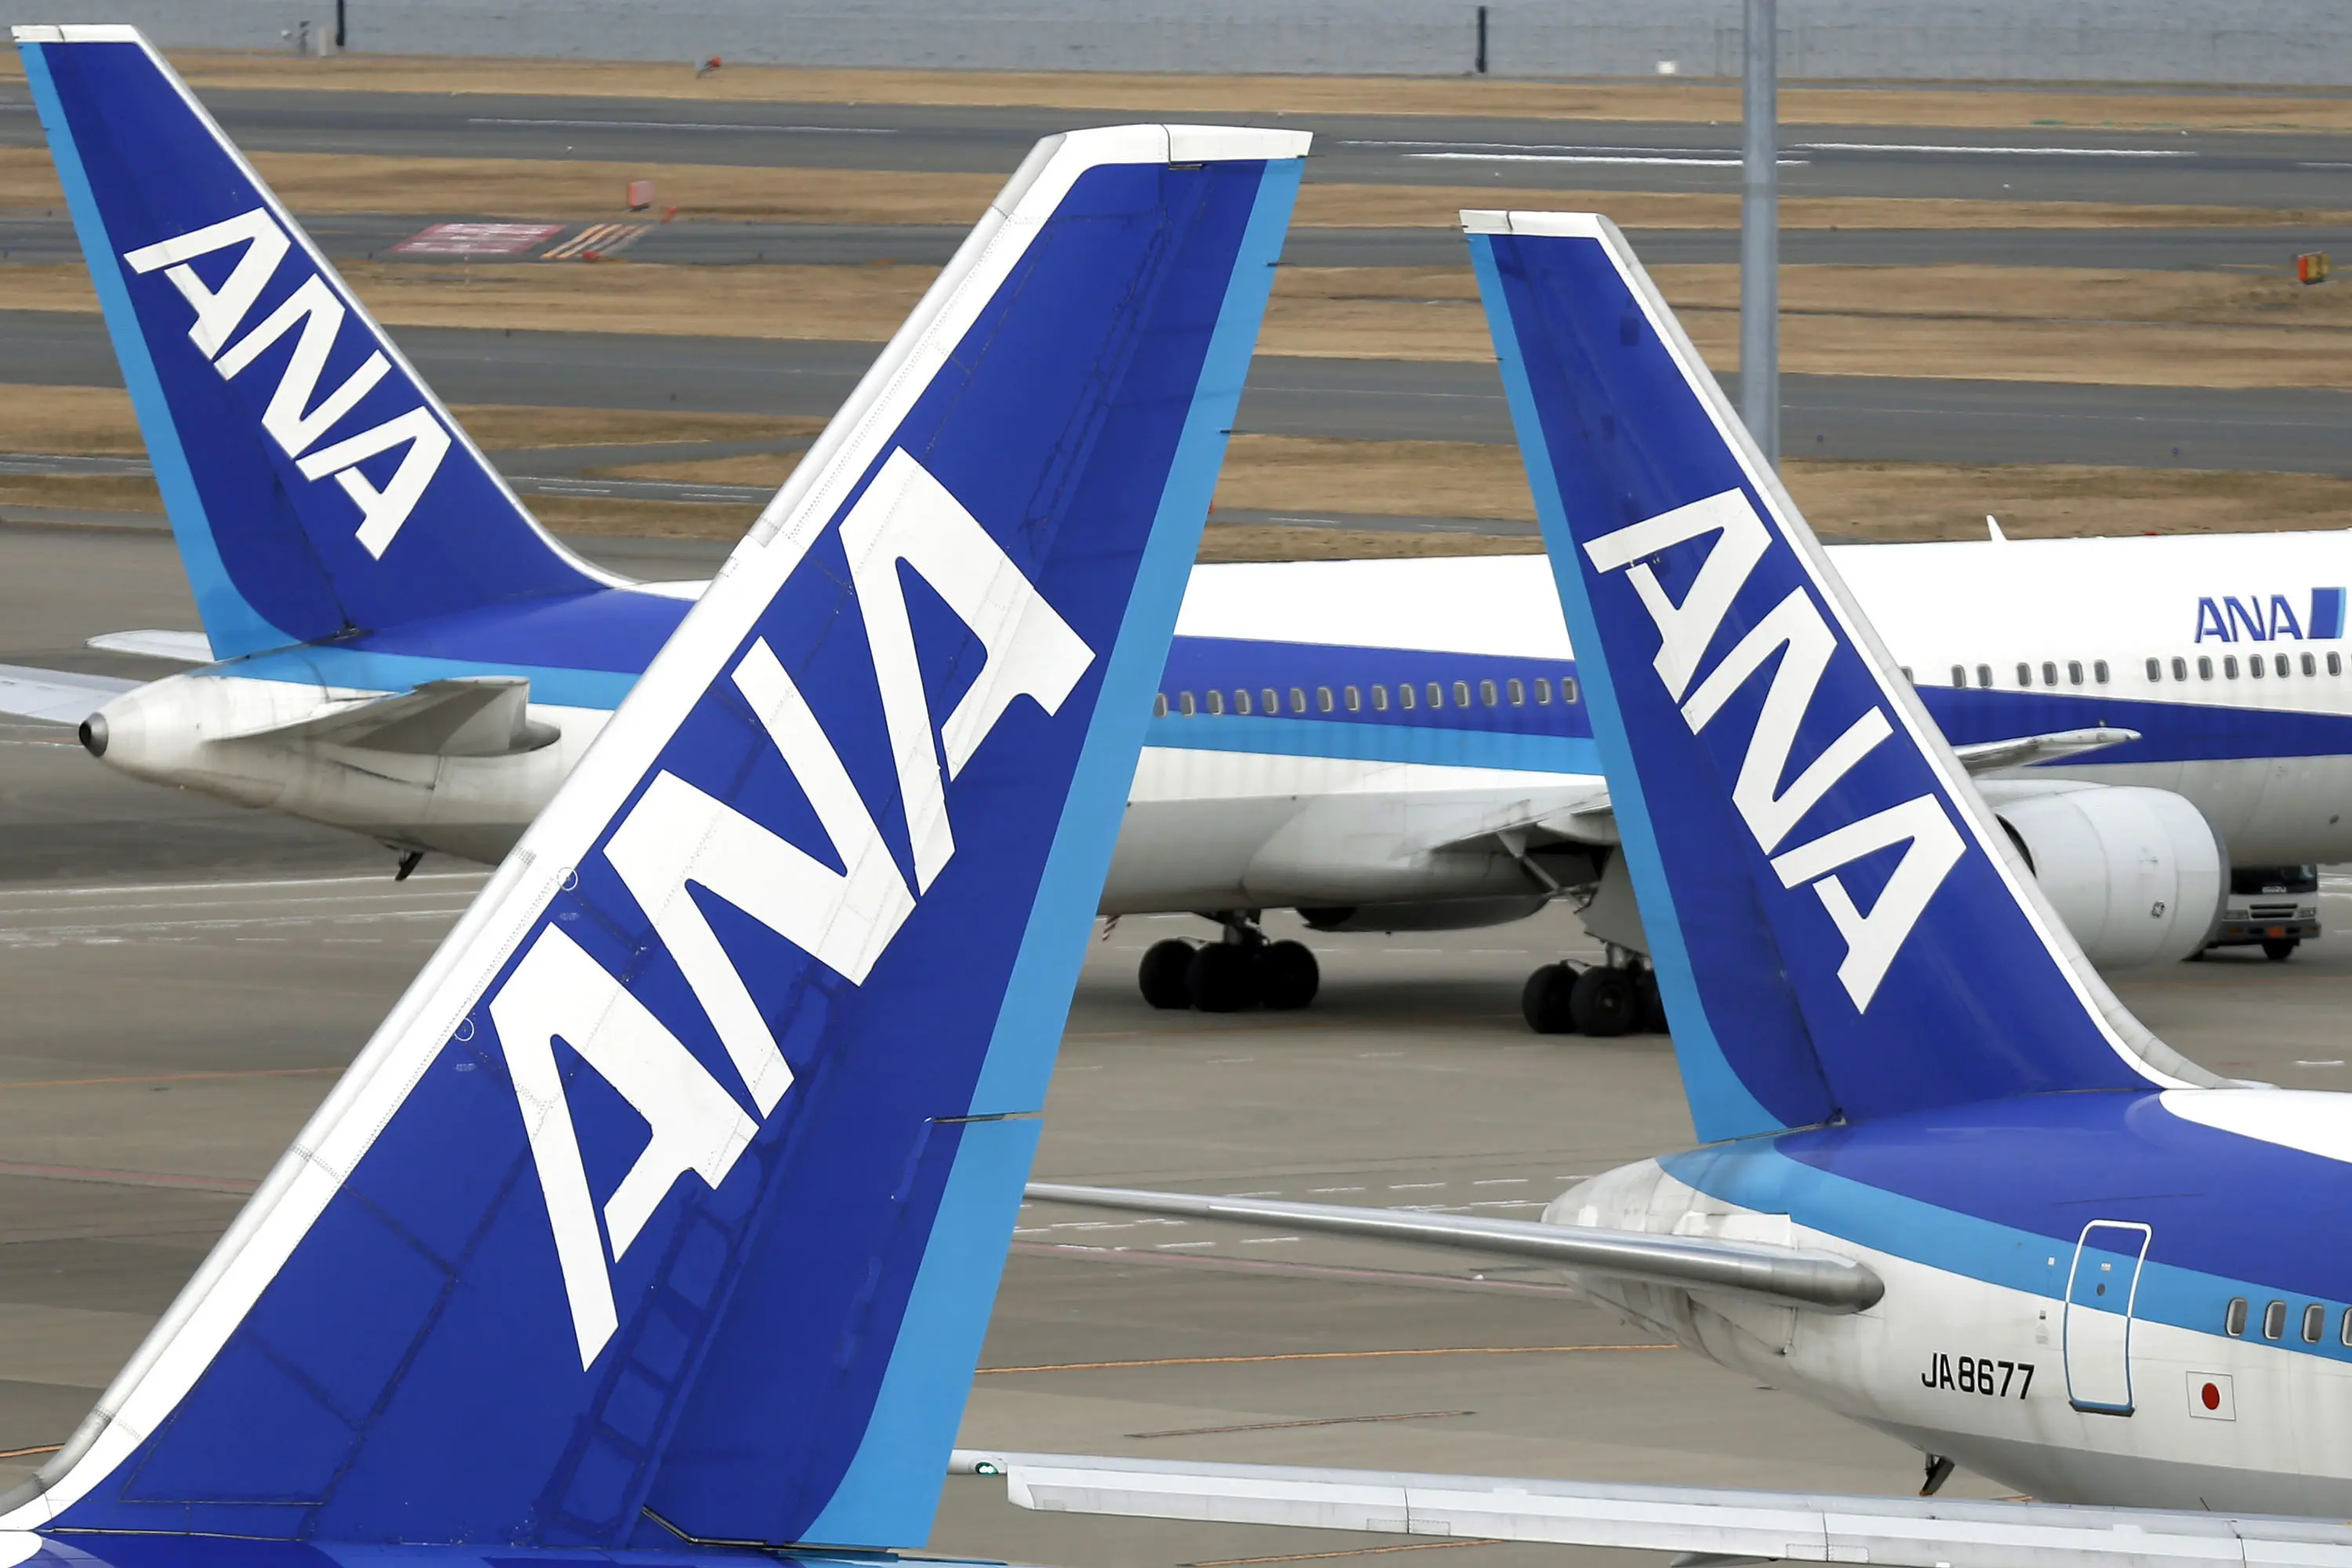 ANA 787 with engine problem makes emergency landing in Russia